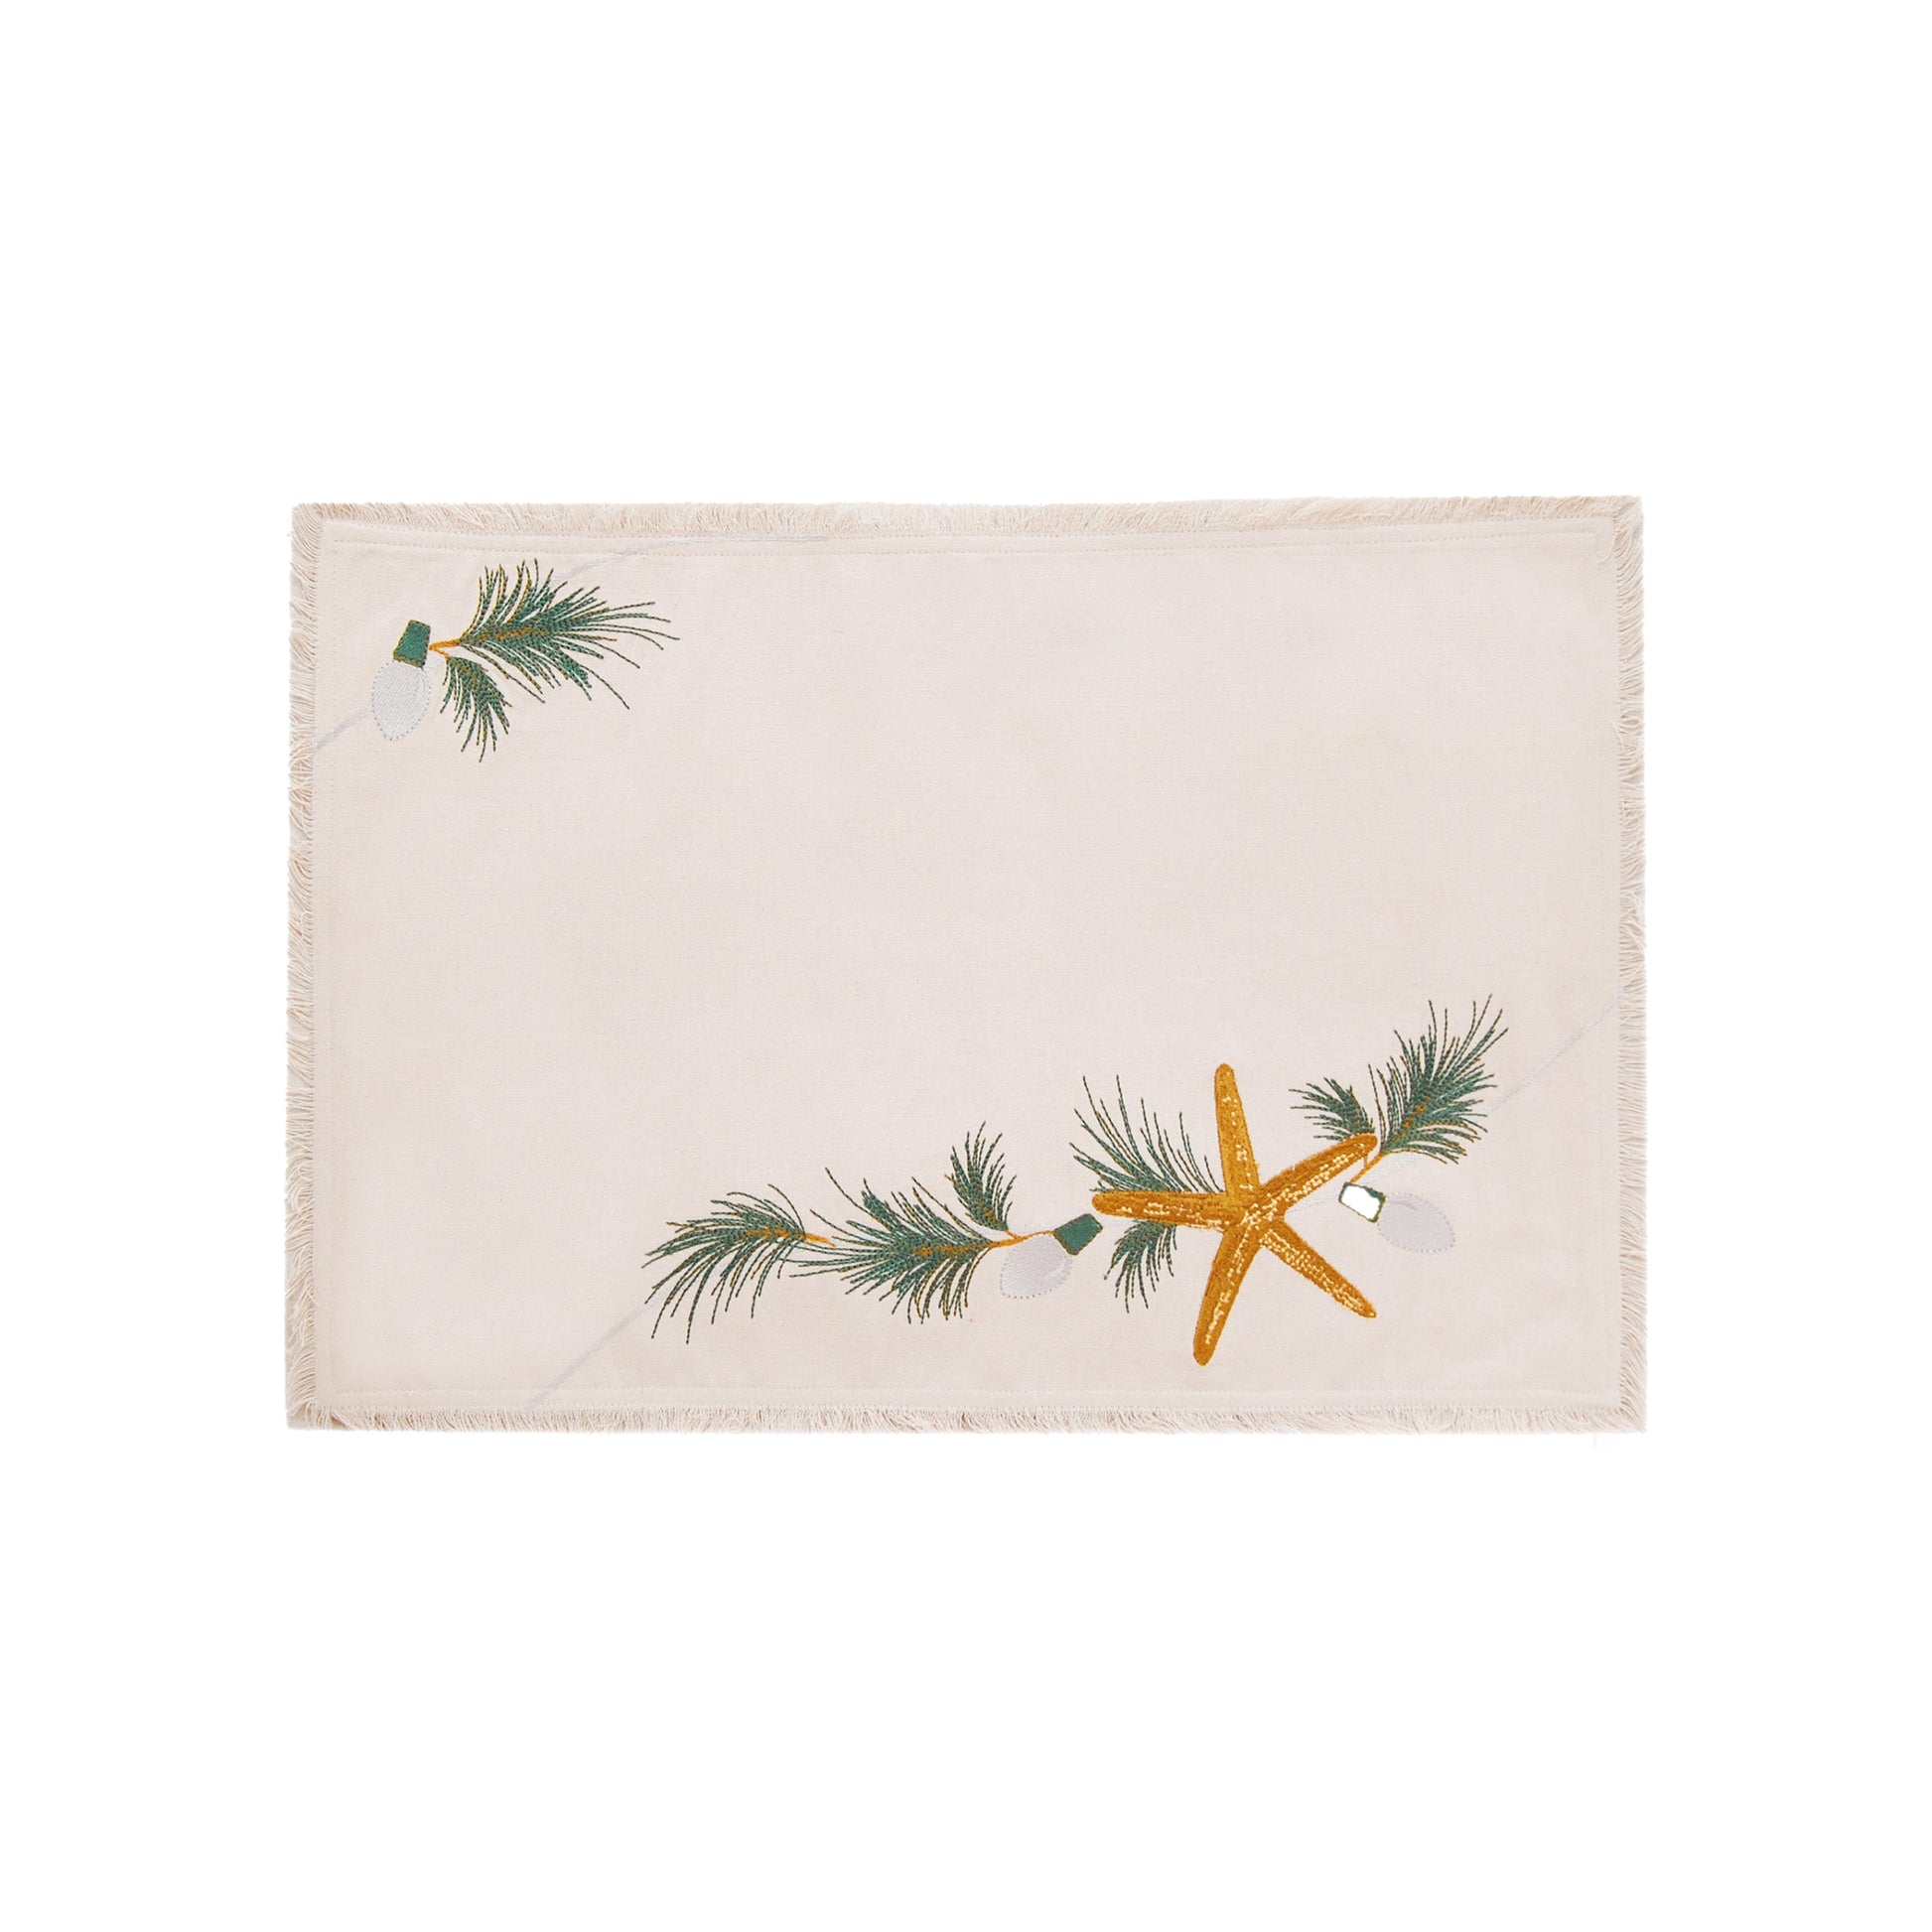 Natural cotton fringed placemat featuring an embroidered sea star, holiday lights, and evergreen needles.